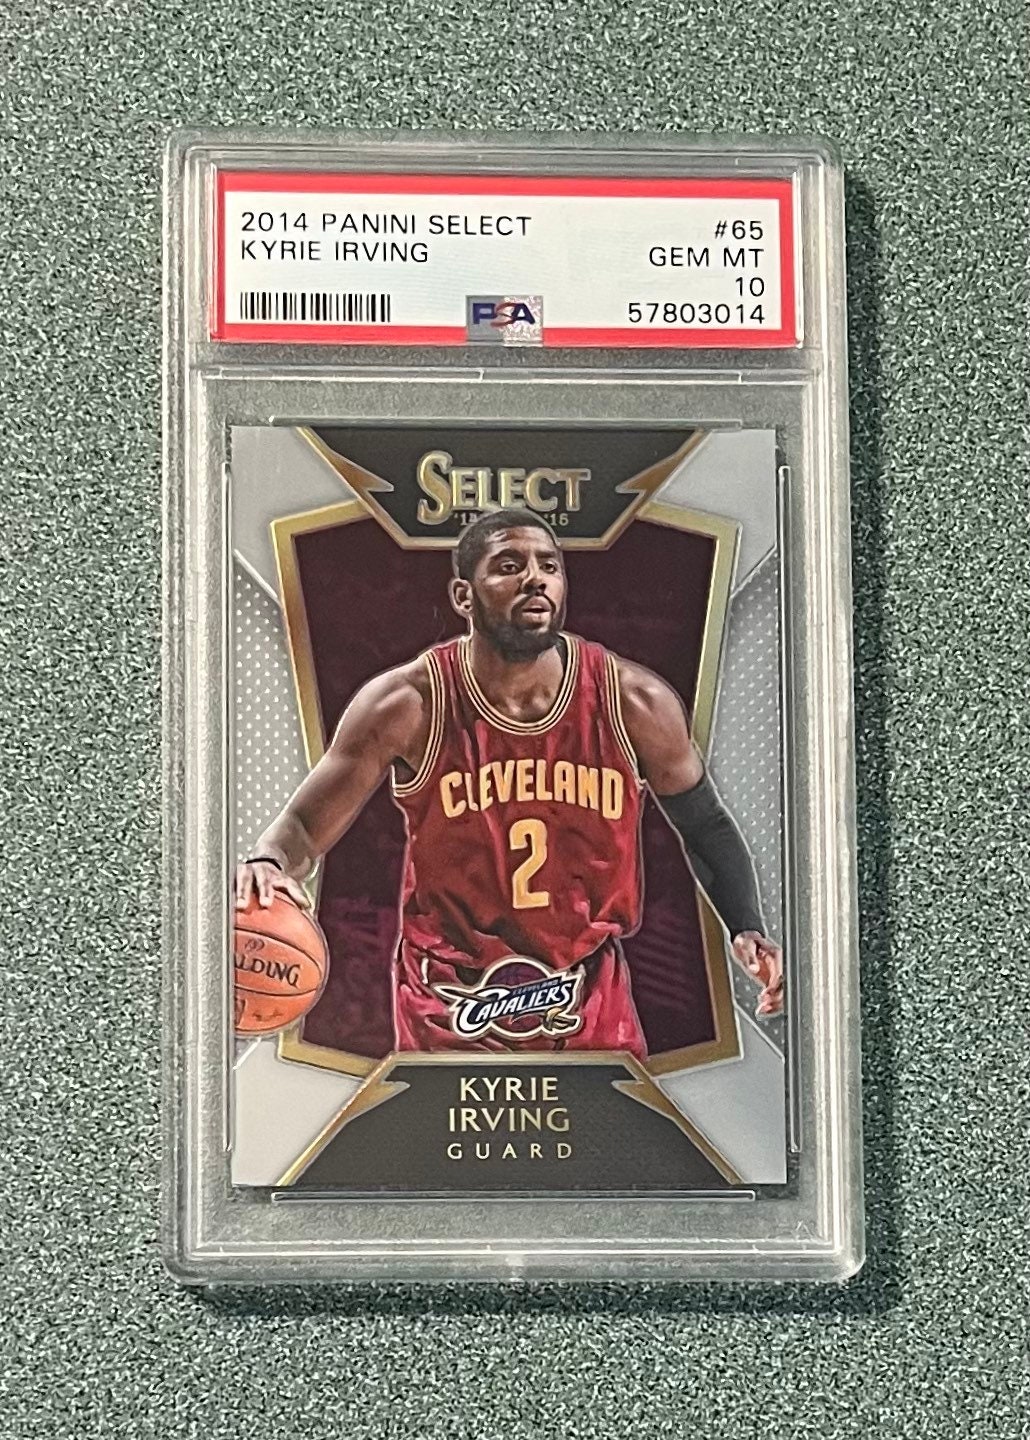 Kyrie Irving Signed Nets Jersey (Panini)